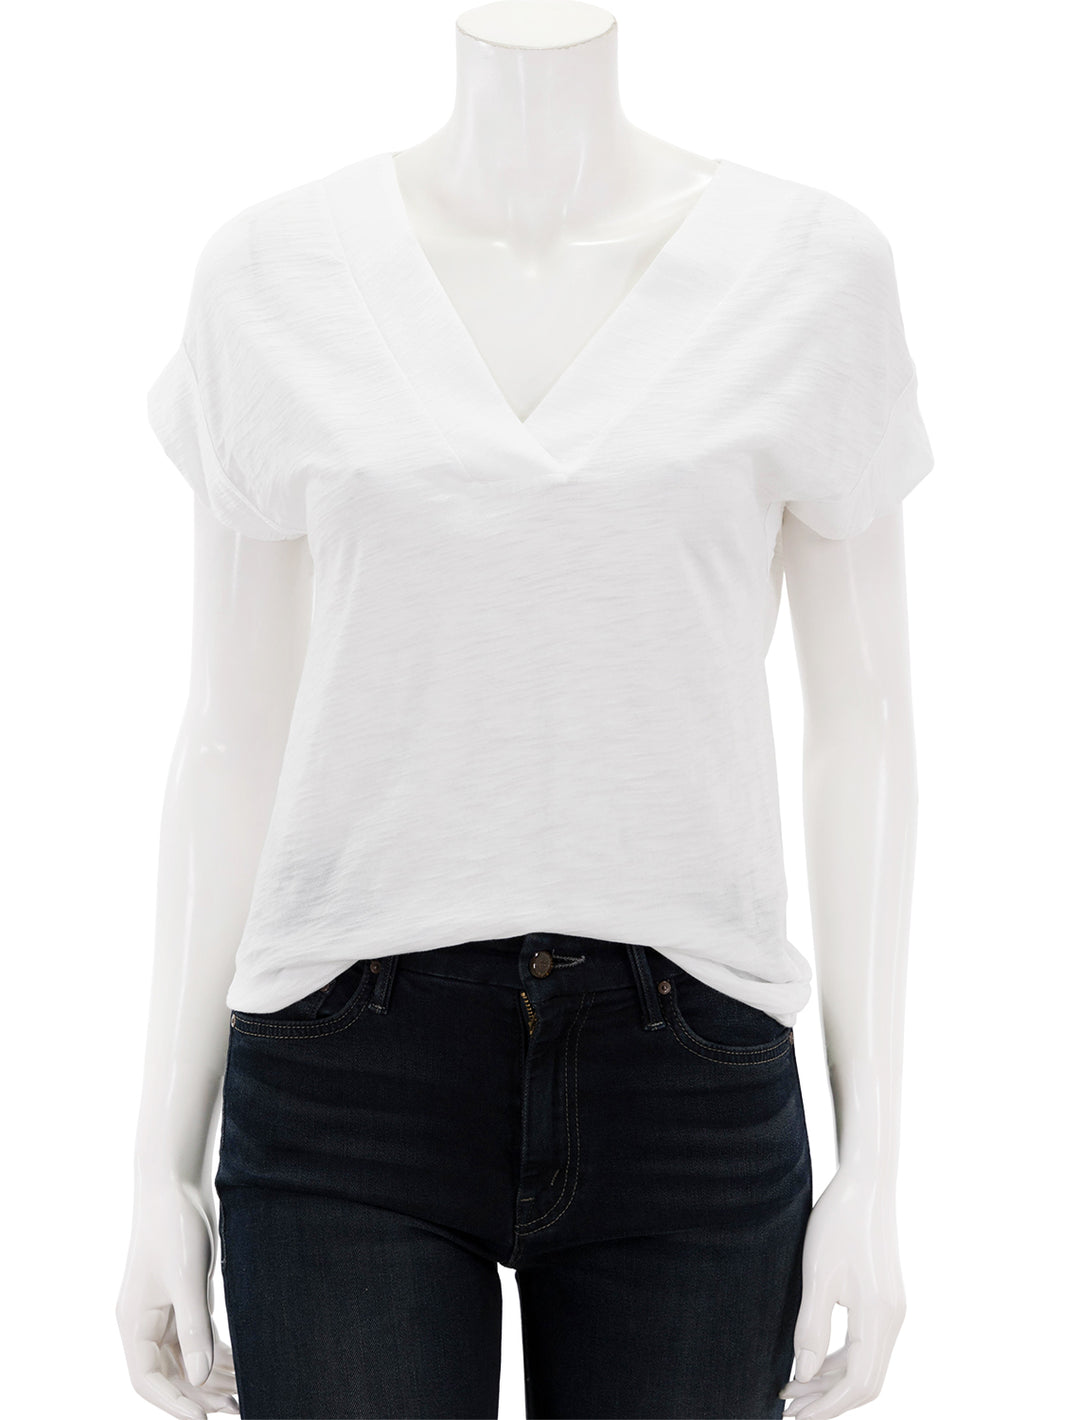 Front view of Goldie Lewinter's mariana basic v neck in white.